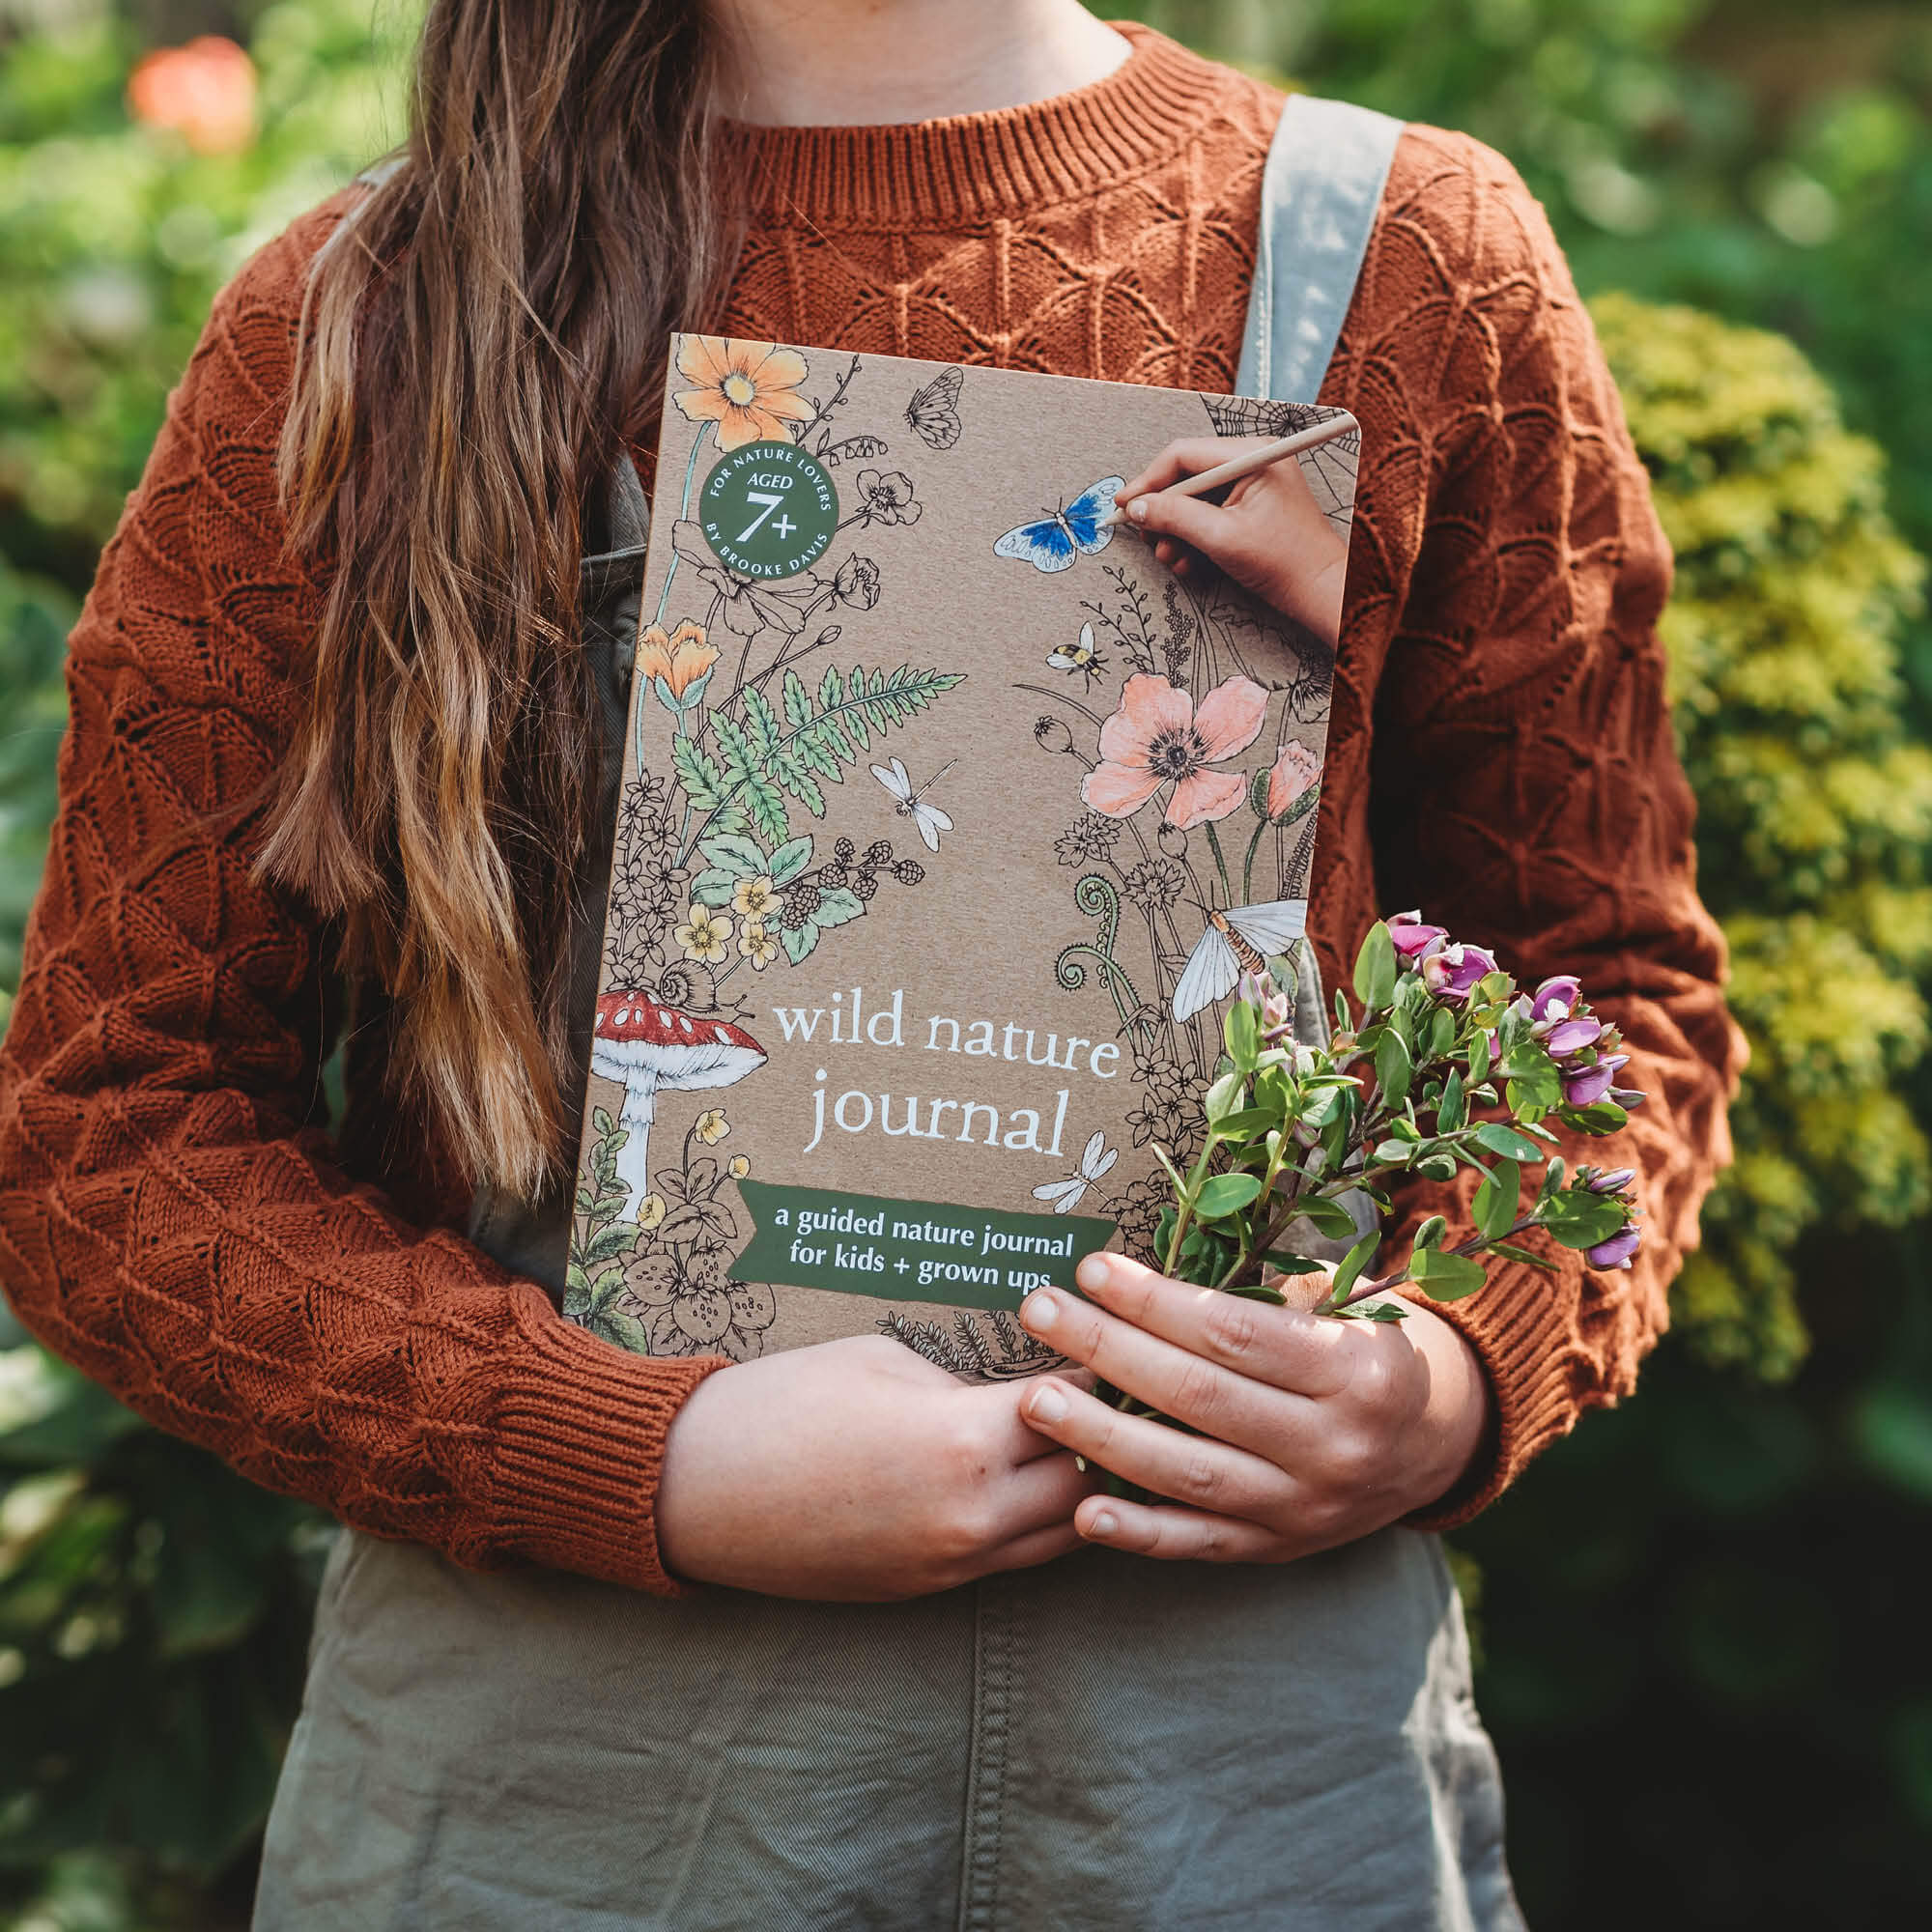 Child holding flowers and Wild Nature Journal, a guided nature journal for kids and grown ups is made in Australia by Your Wild Books.